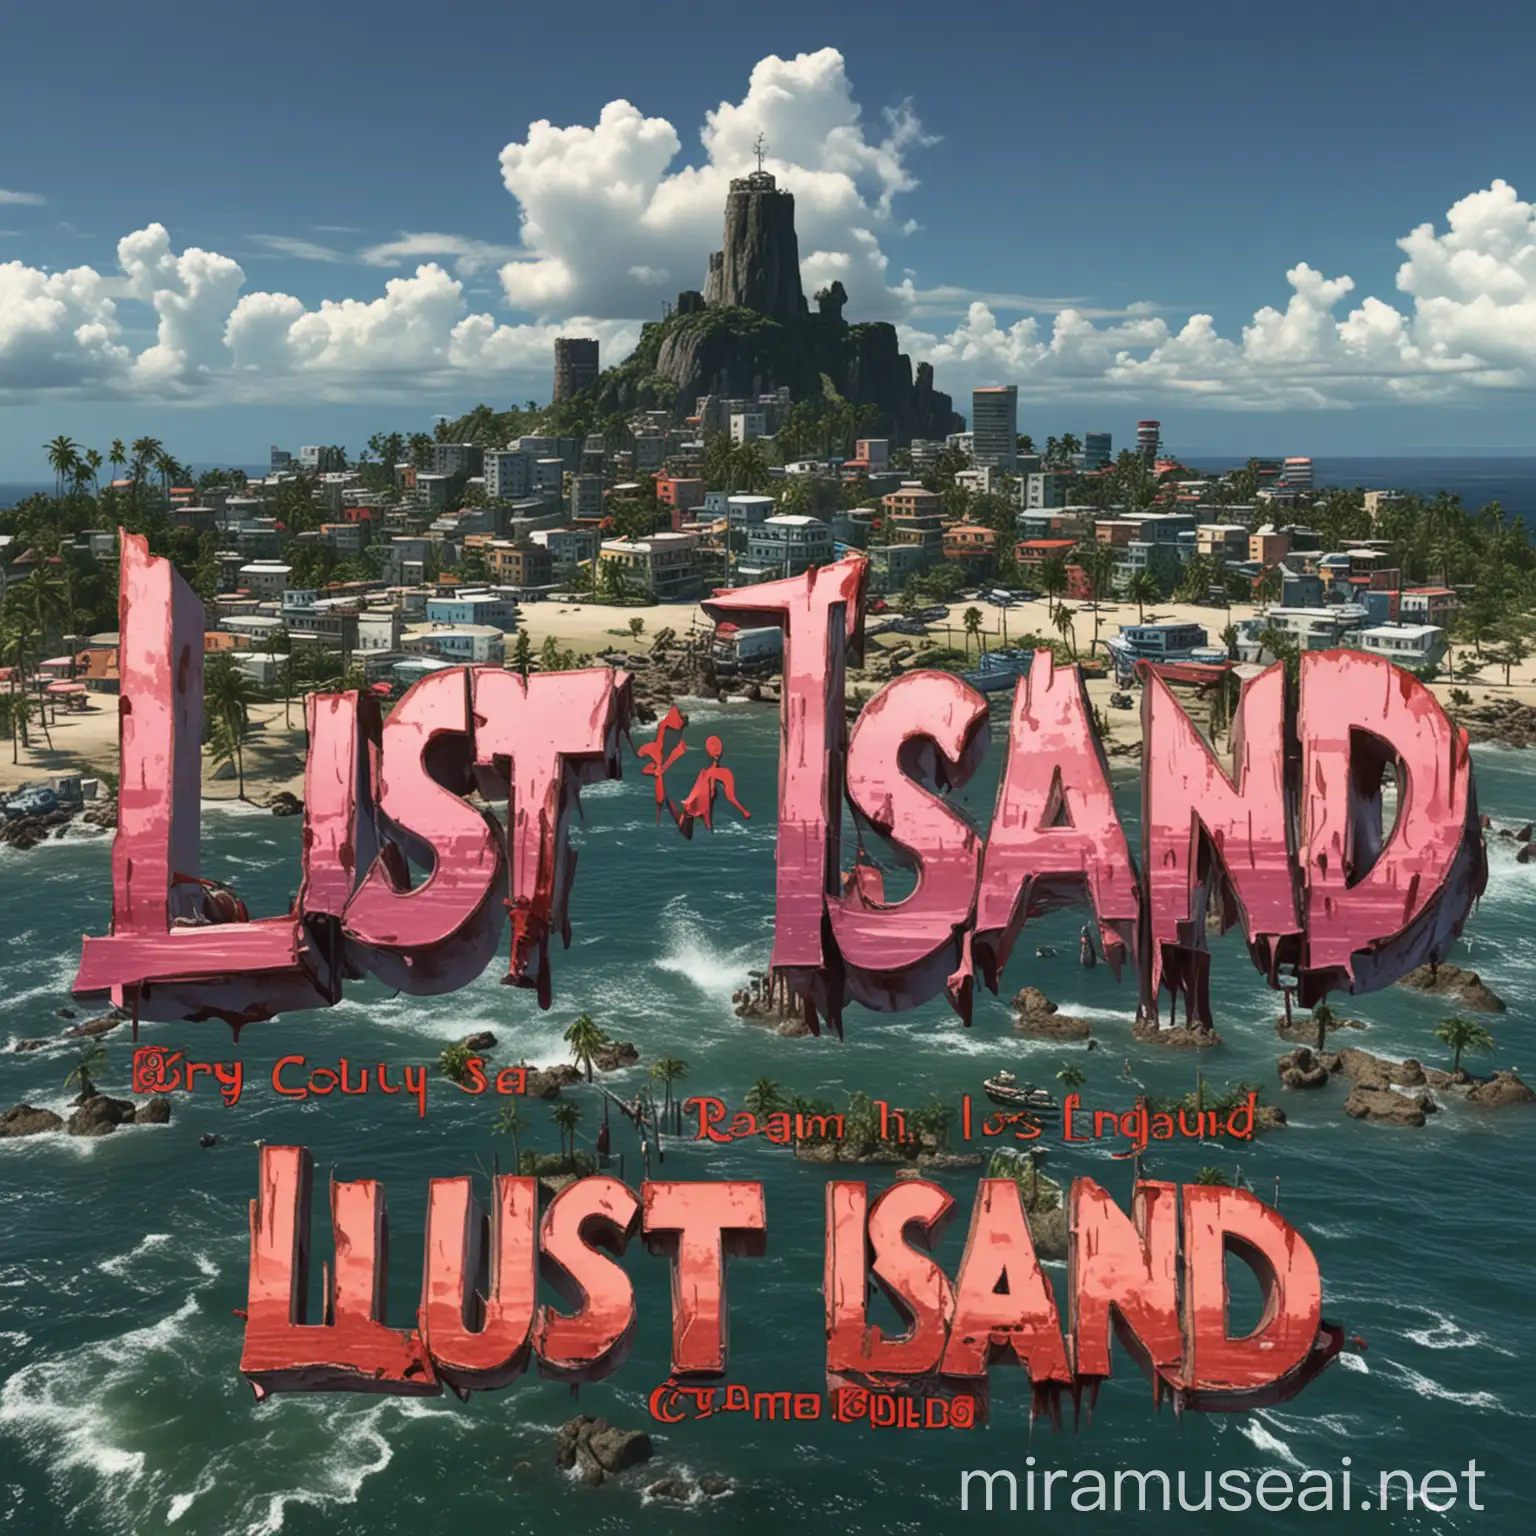 A lusty Island City in the background and a title name as “LUST ISLAND”